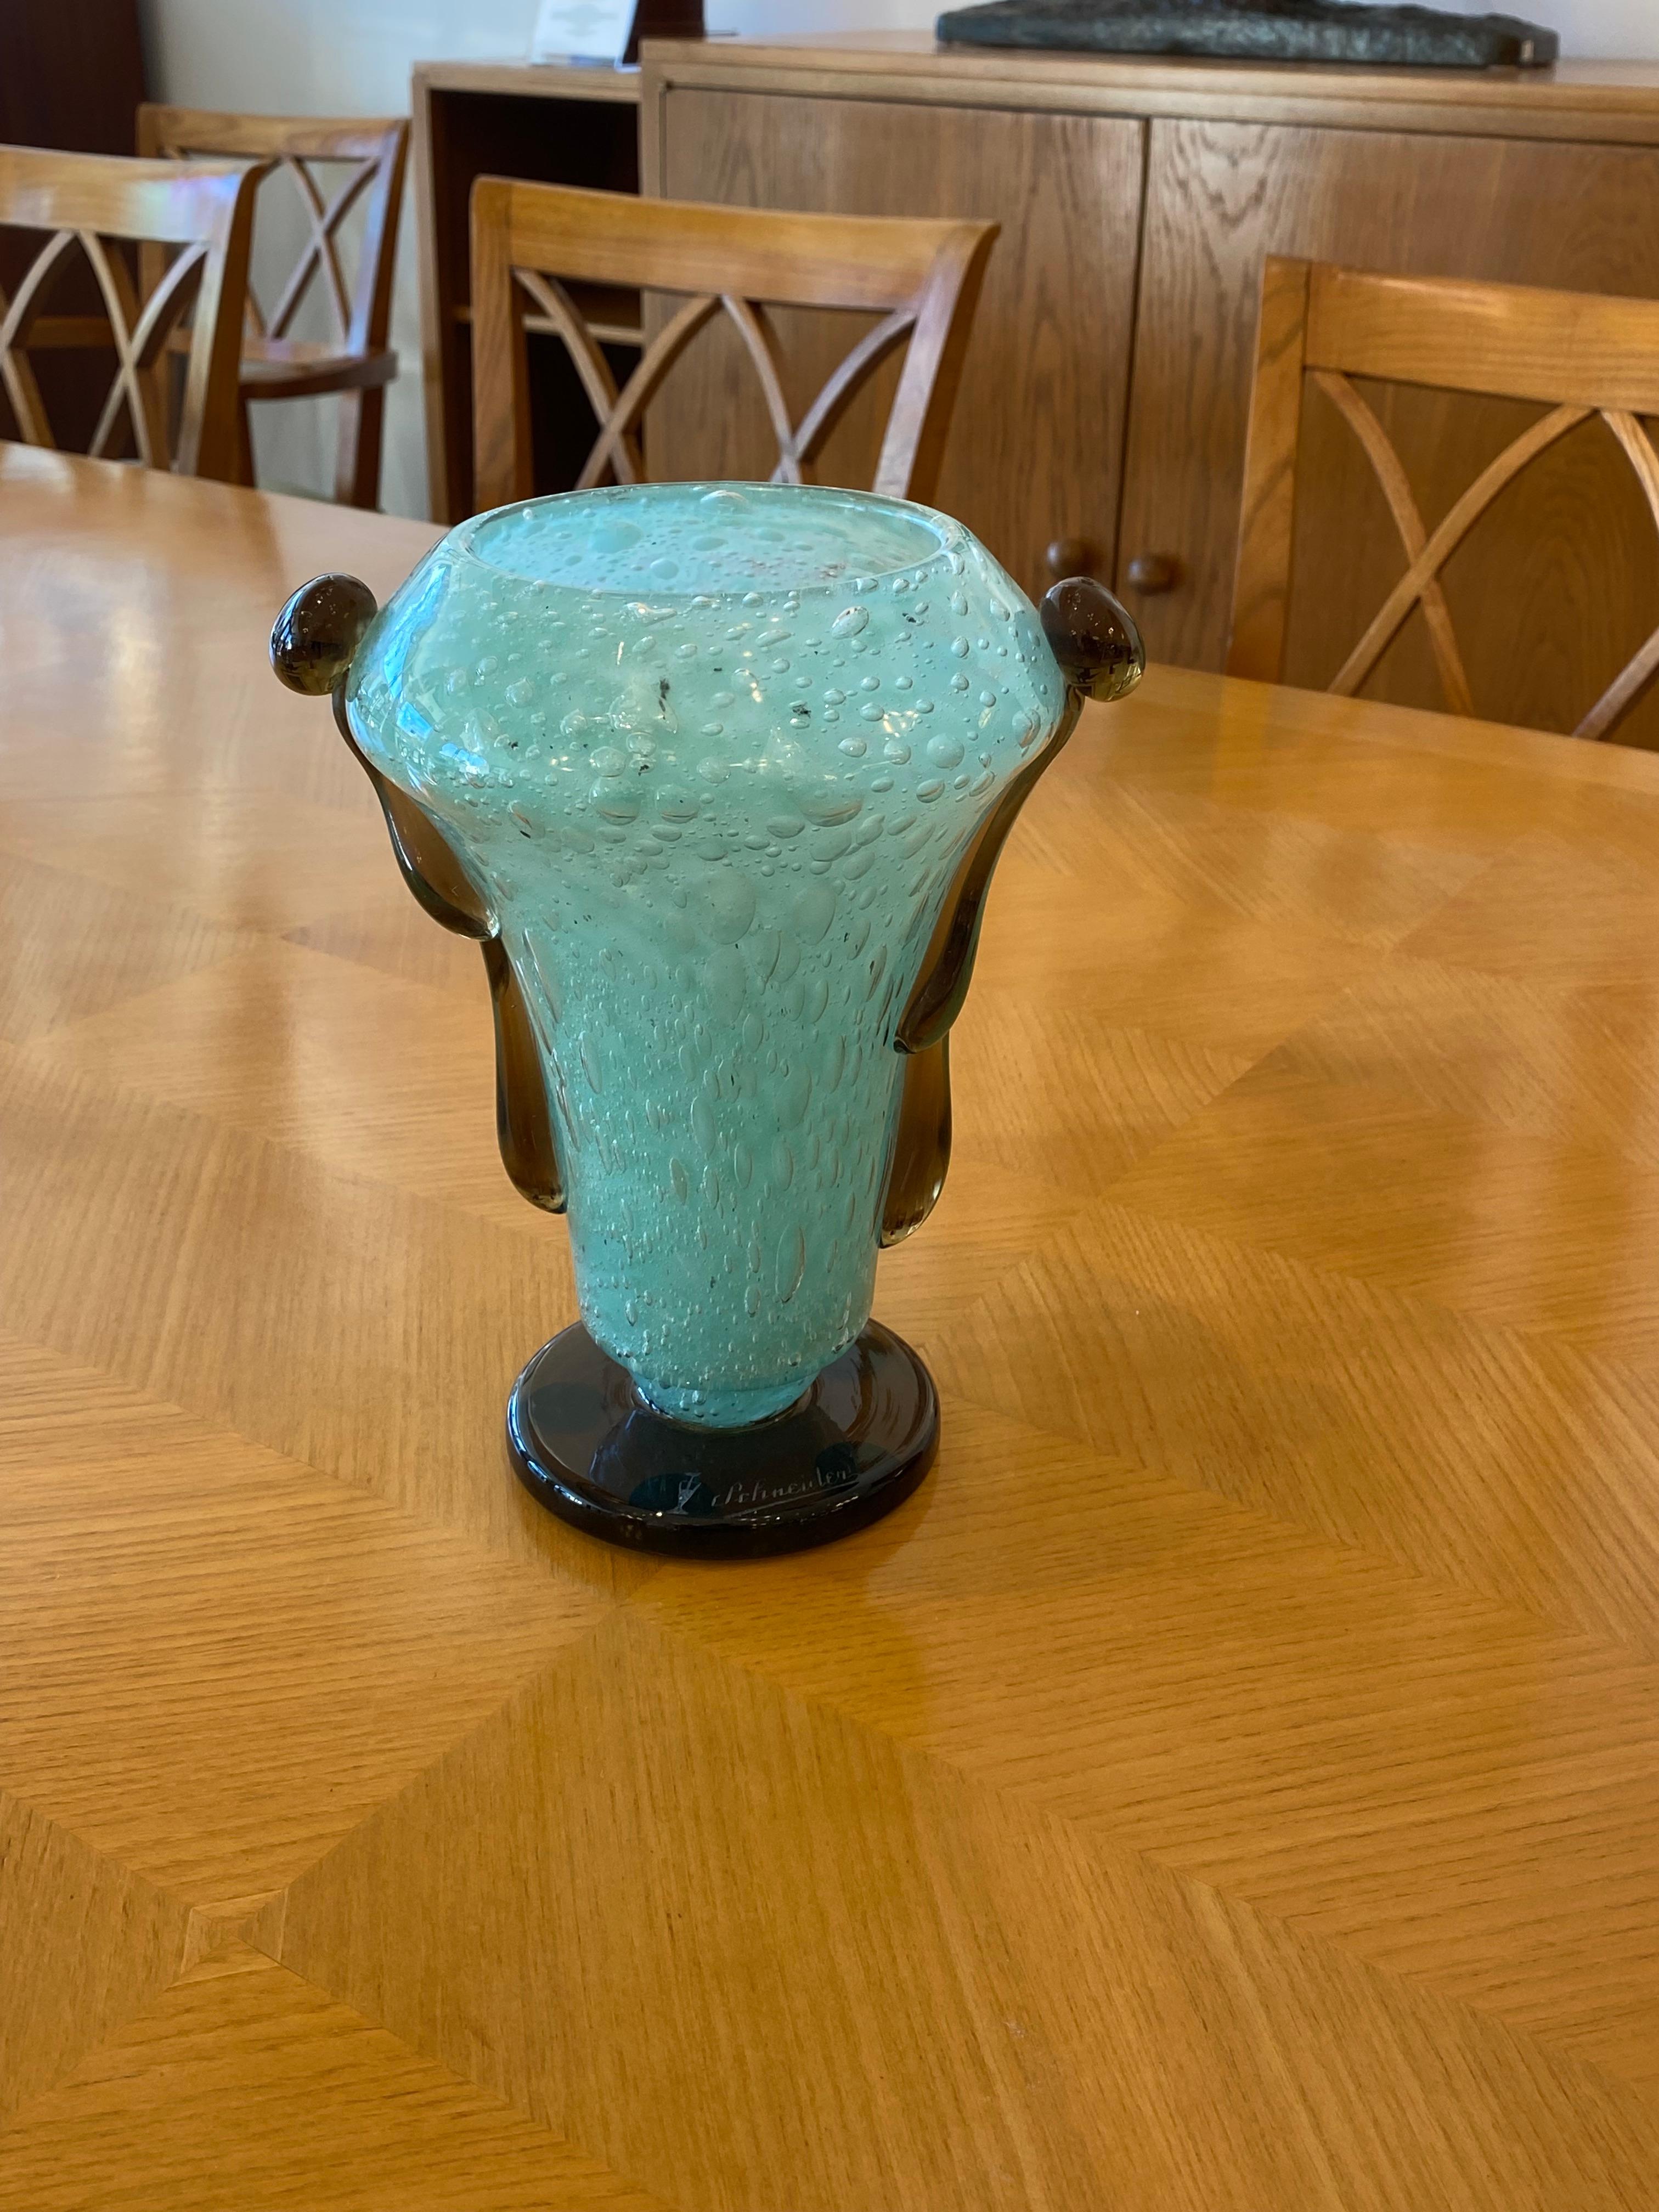 Art Deco glass vase by Charles Schneider artistic direction, in a Jade color glass with application in dark brown color tear-like applications along the body.
Made in France
Circa: 1922
Signature: 